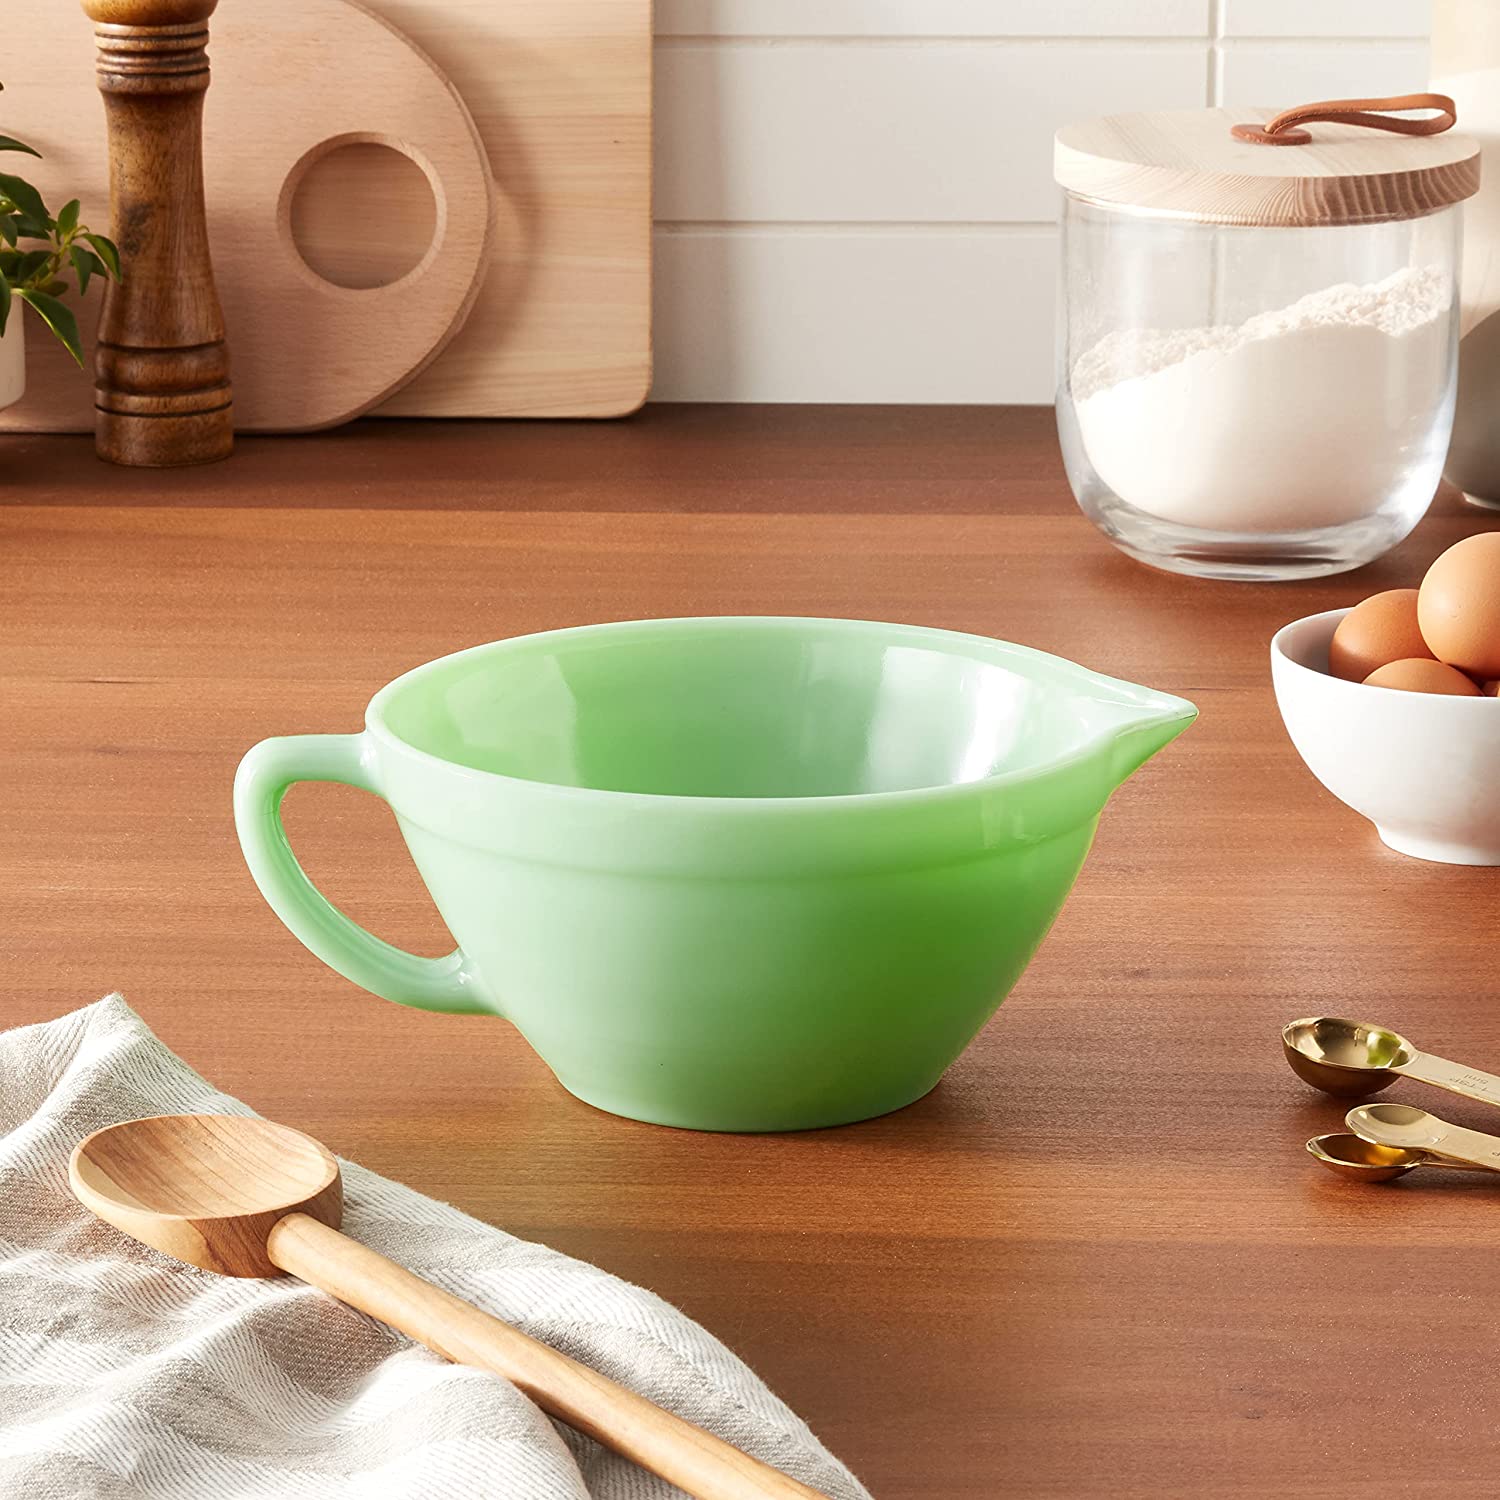 Jadeite Dishes: Real or Reproduction? Here's How to Tell